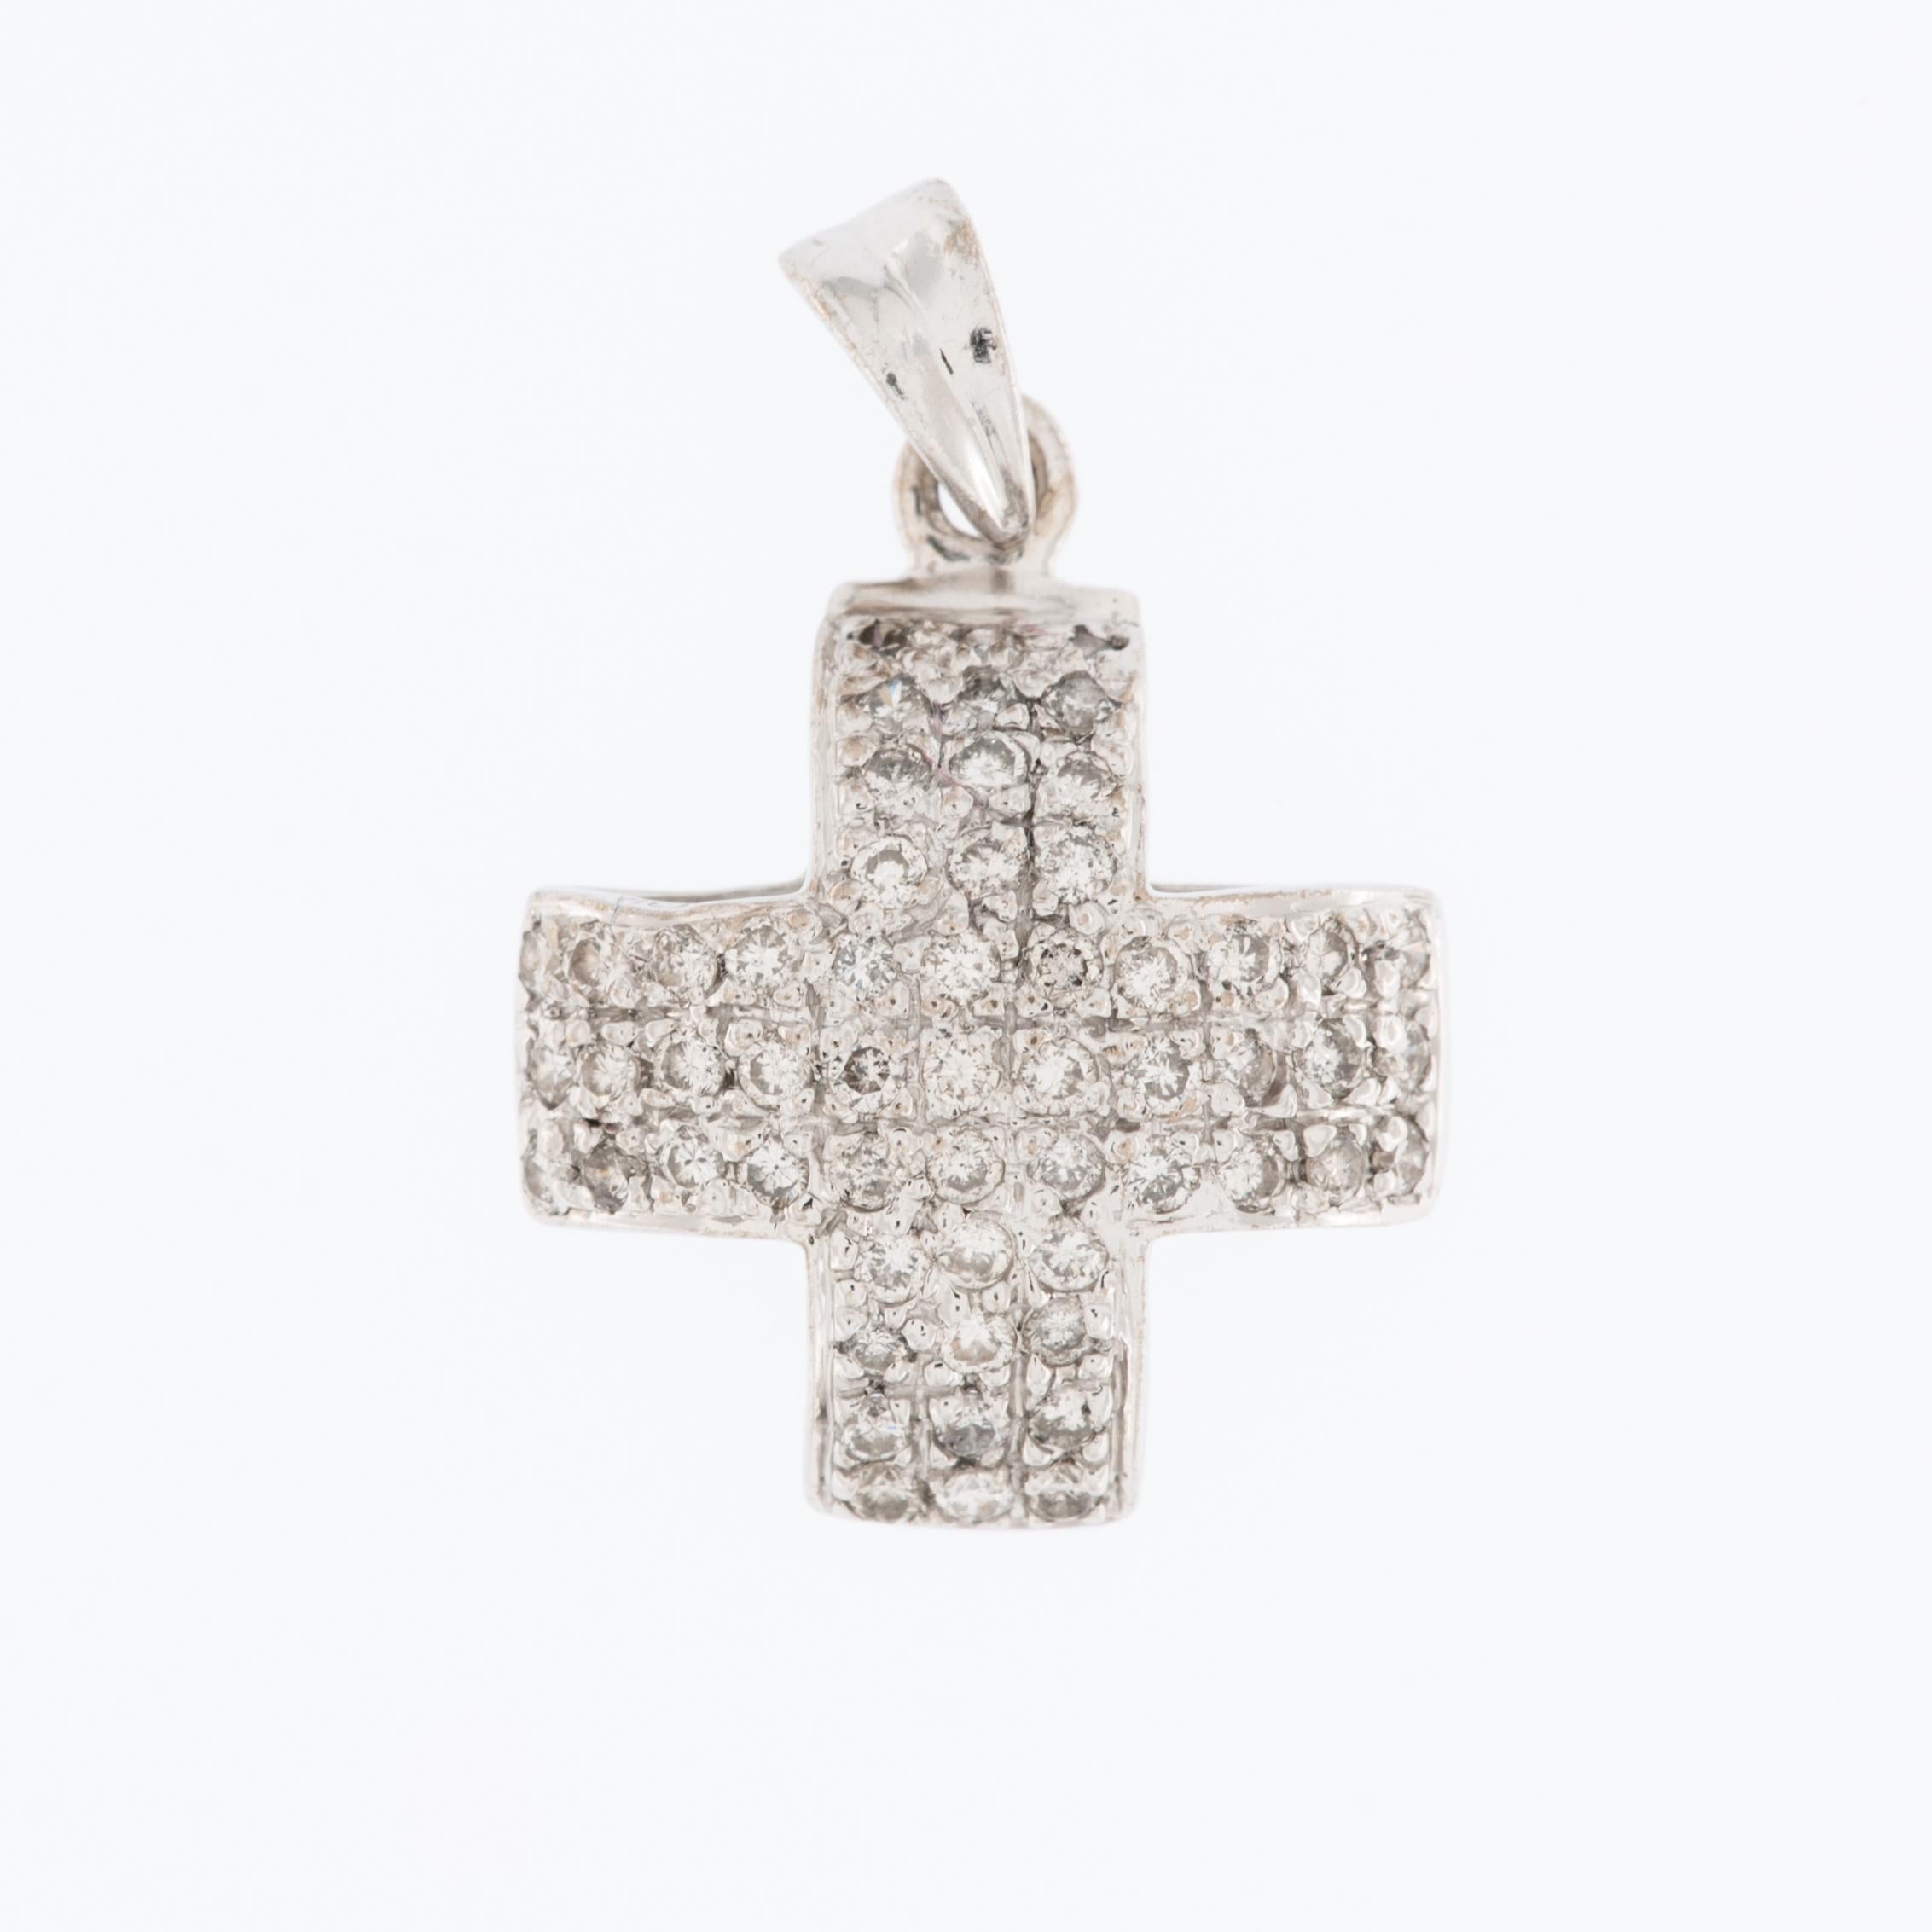 The Swiss Modern 18kt White Gold Cross with Diamonds is a marvelous piece of jewelry that exudes elegance and timeless charm. 

This cross pendant is crafted from 18-karat white gold, which is known for its brightness. The use of high-quality gold